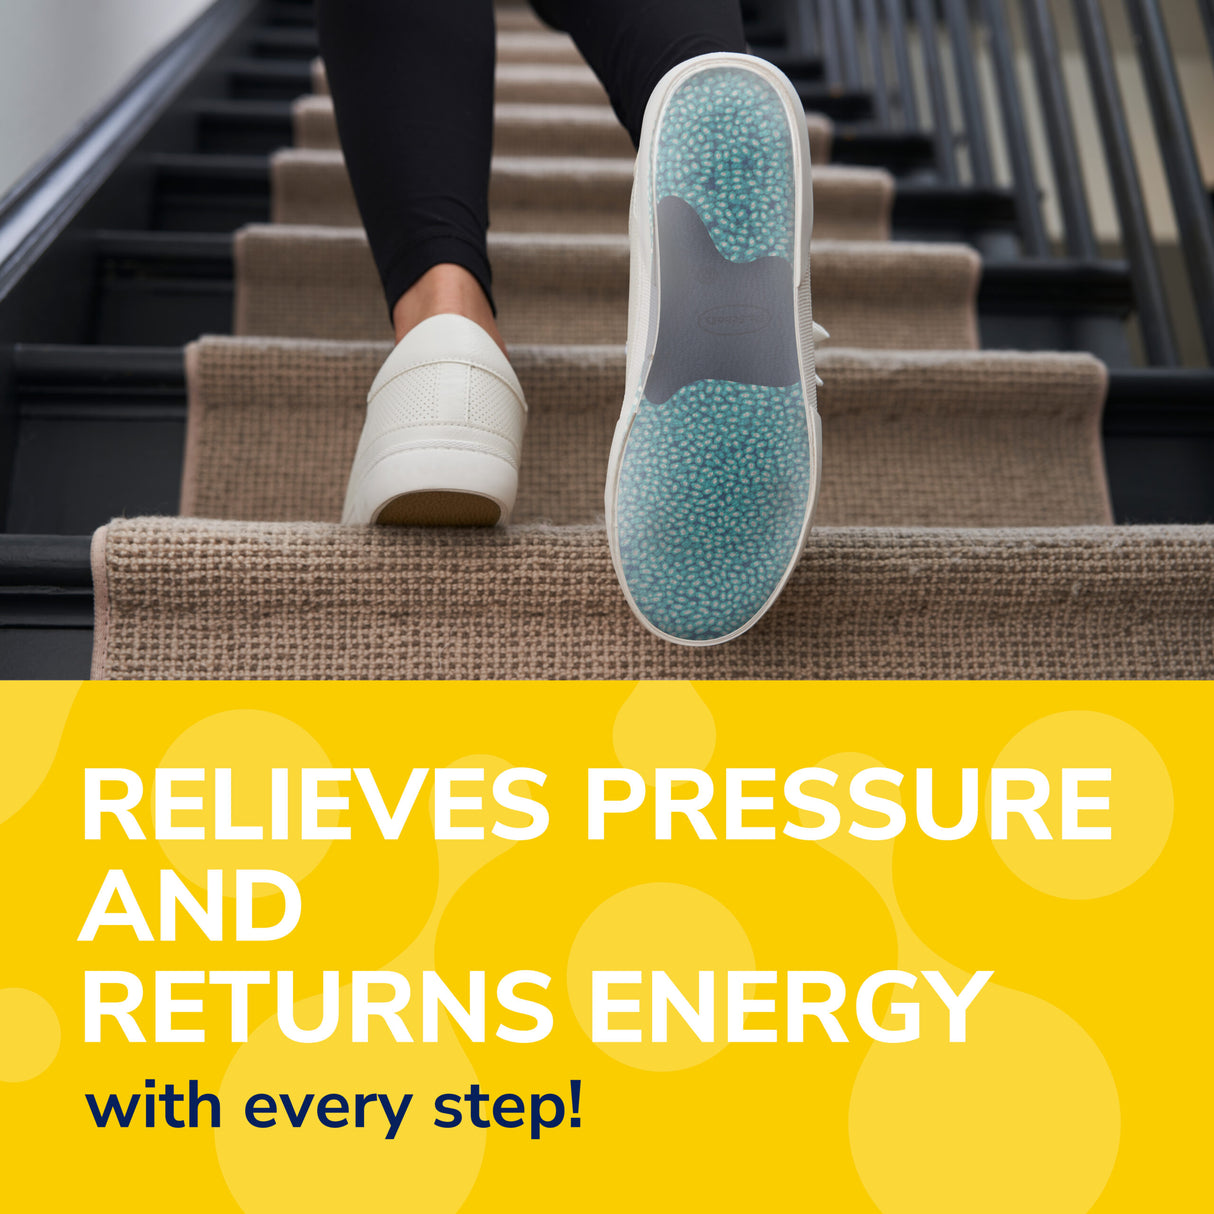 image of relieves pressure and returns energy with every step